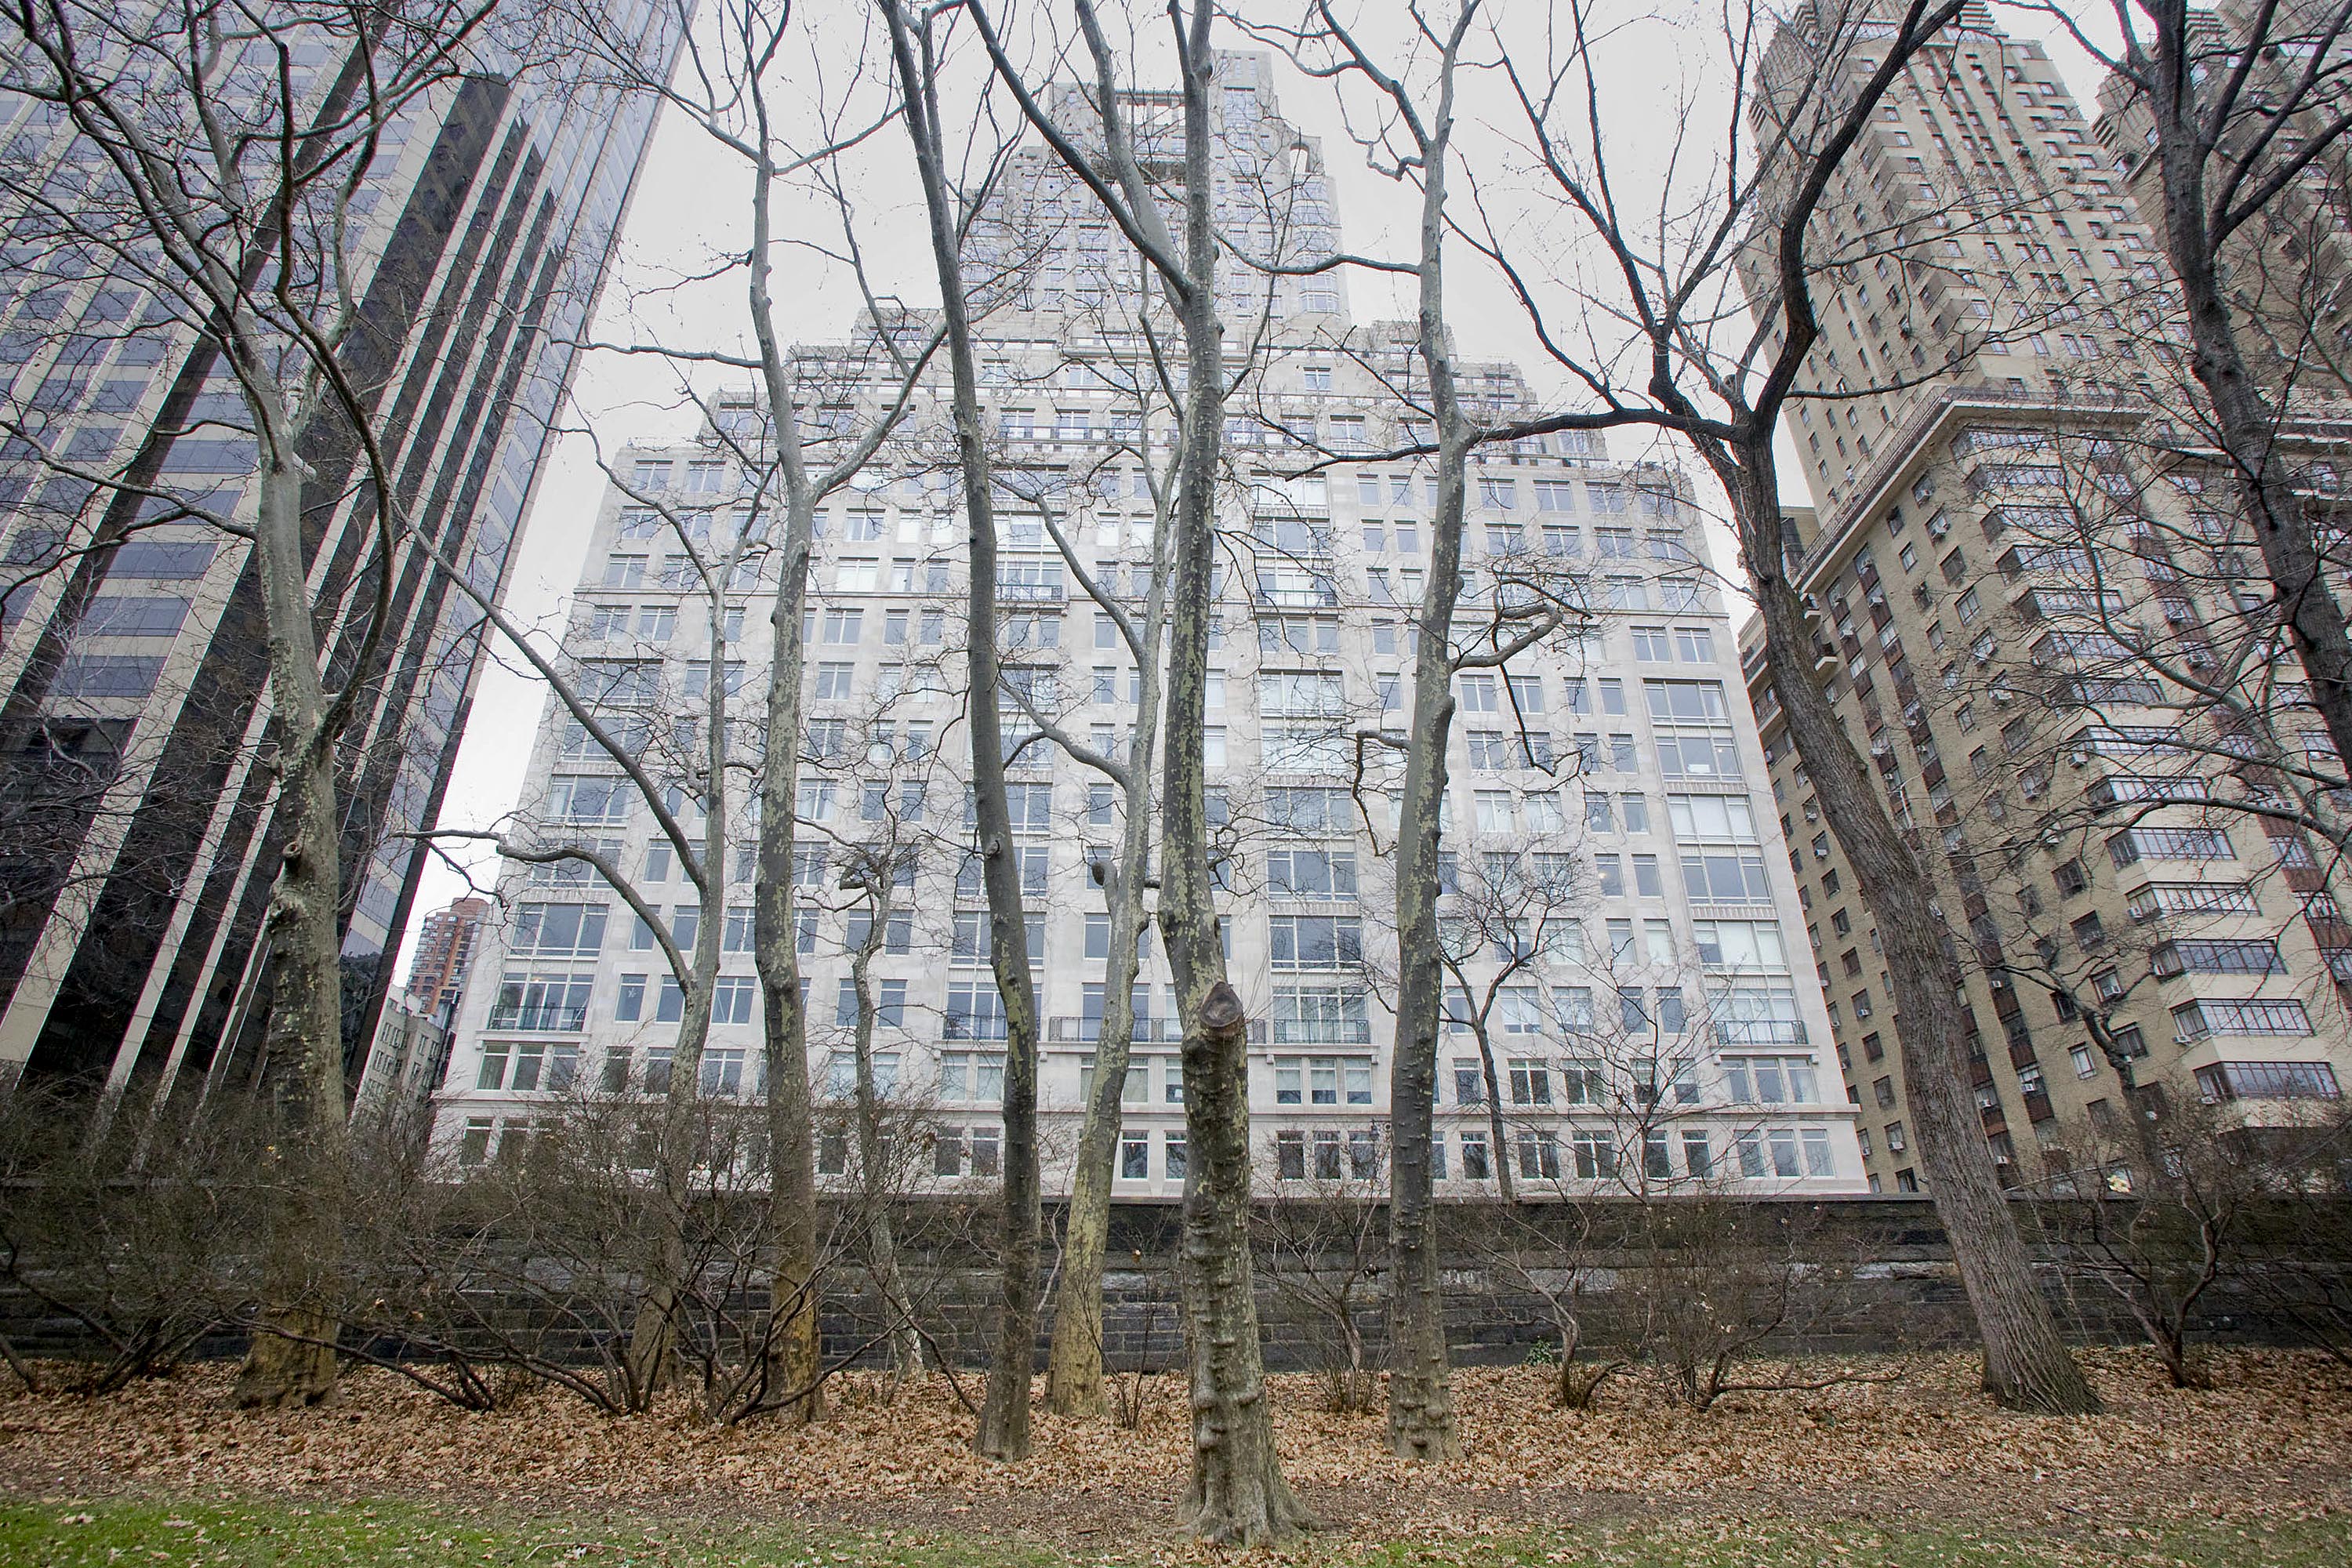 15 Central Park West, a luxury condominium building, stands in New York, U.S., on Jan. 6, 2009.